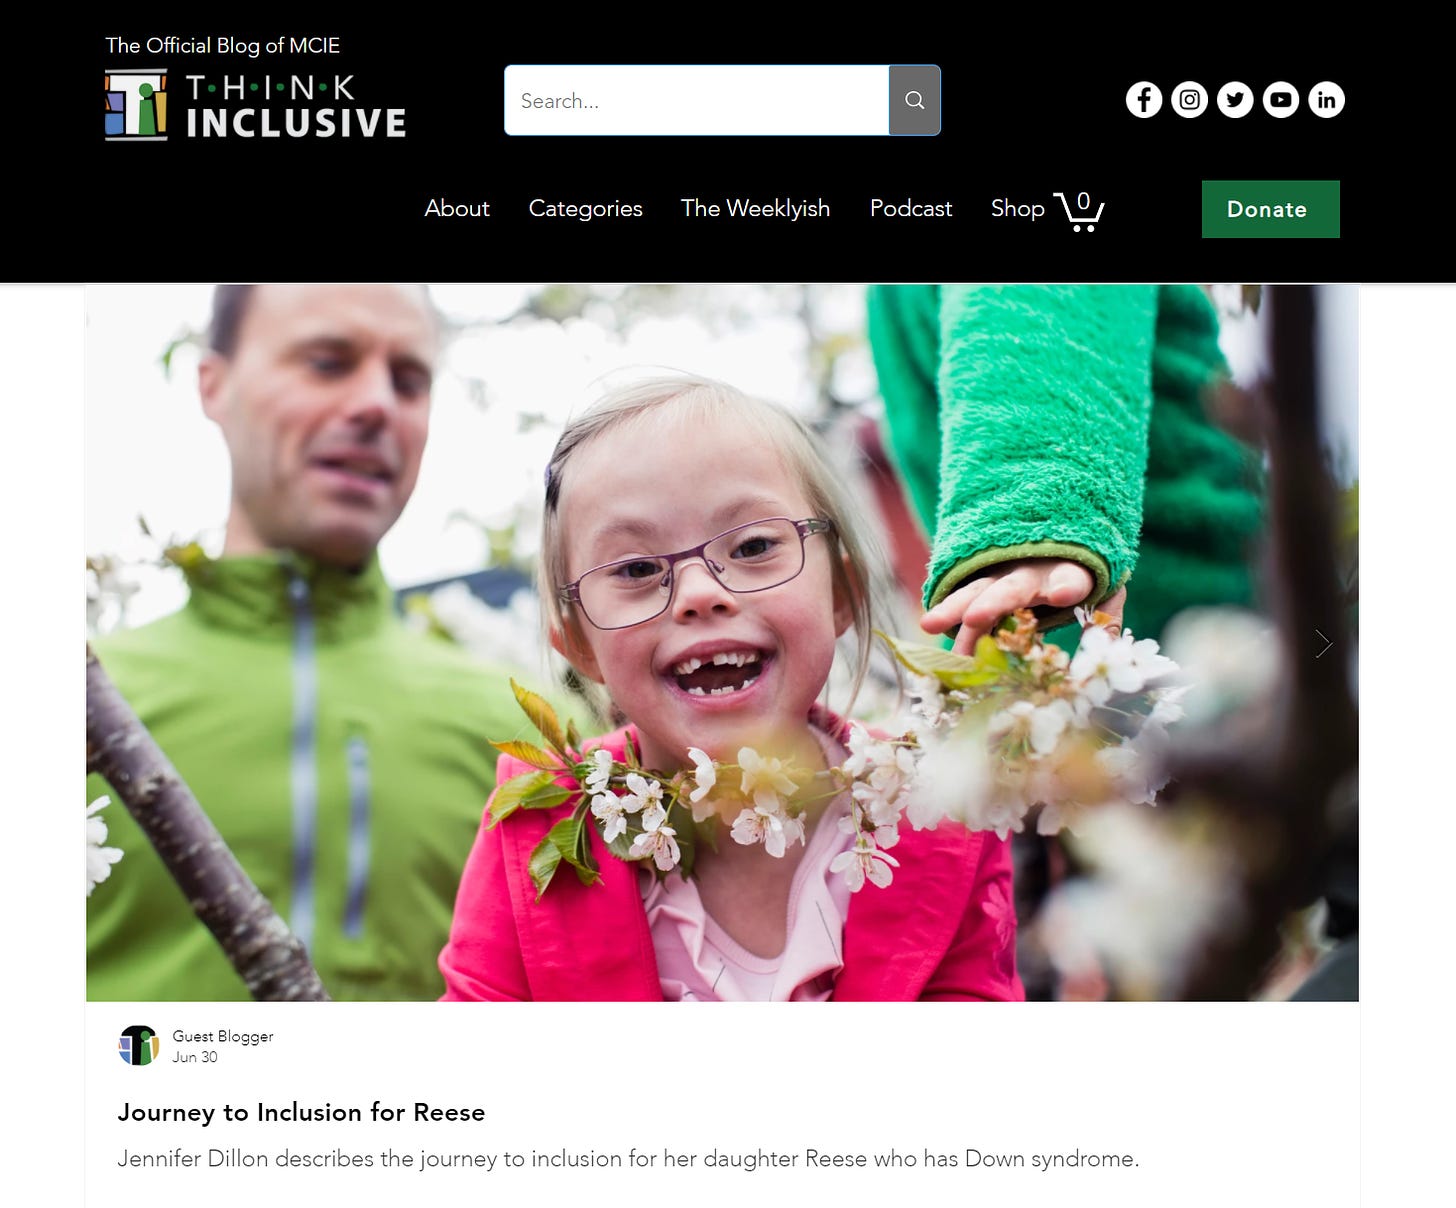 screenshot of the thinkinclusive.us homepage; shows logo, menu, and the featured blog post called “journey to inclusion for reese” with an image of a young girl with down syndrome smiling